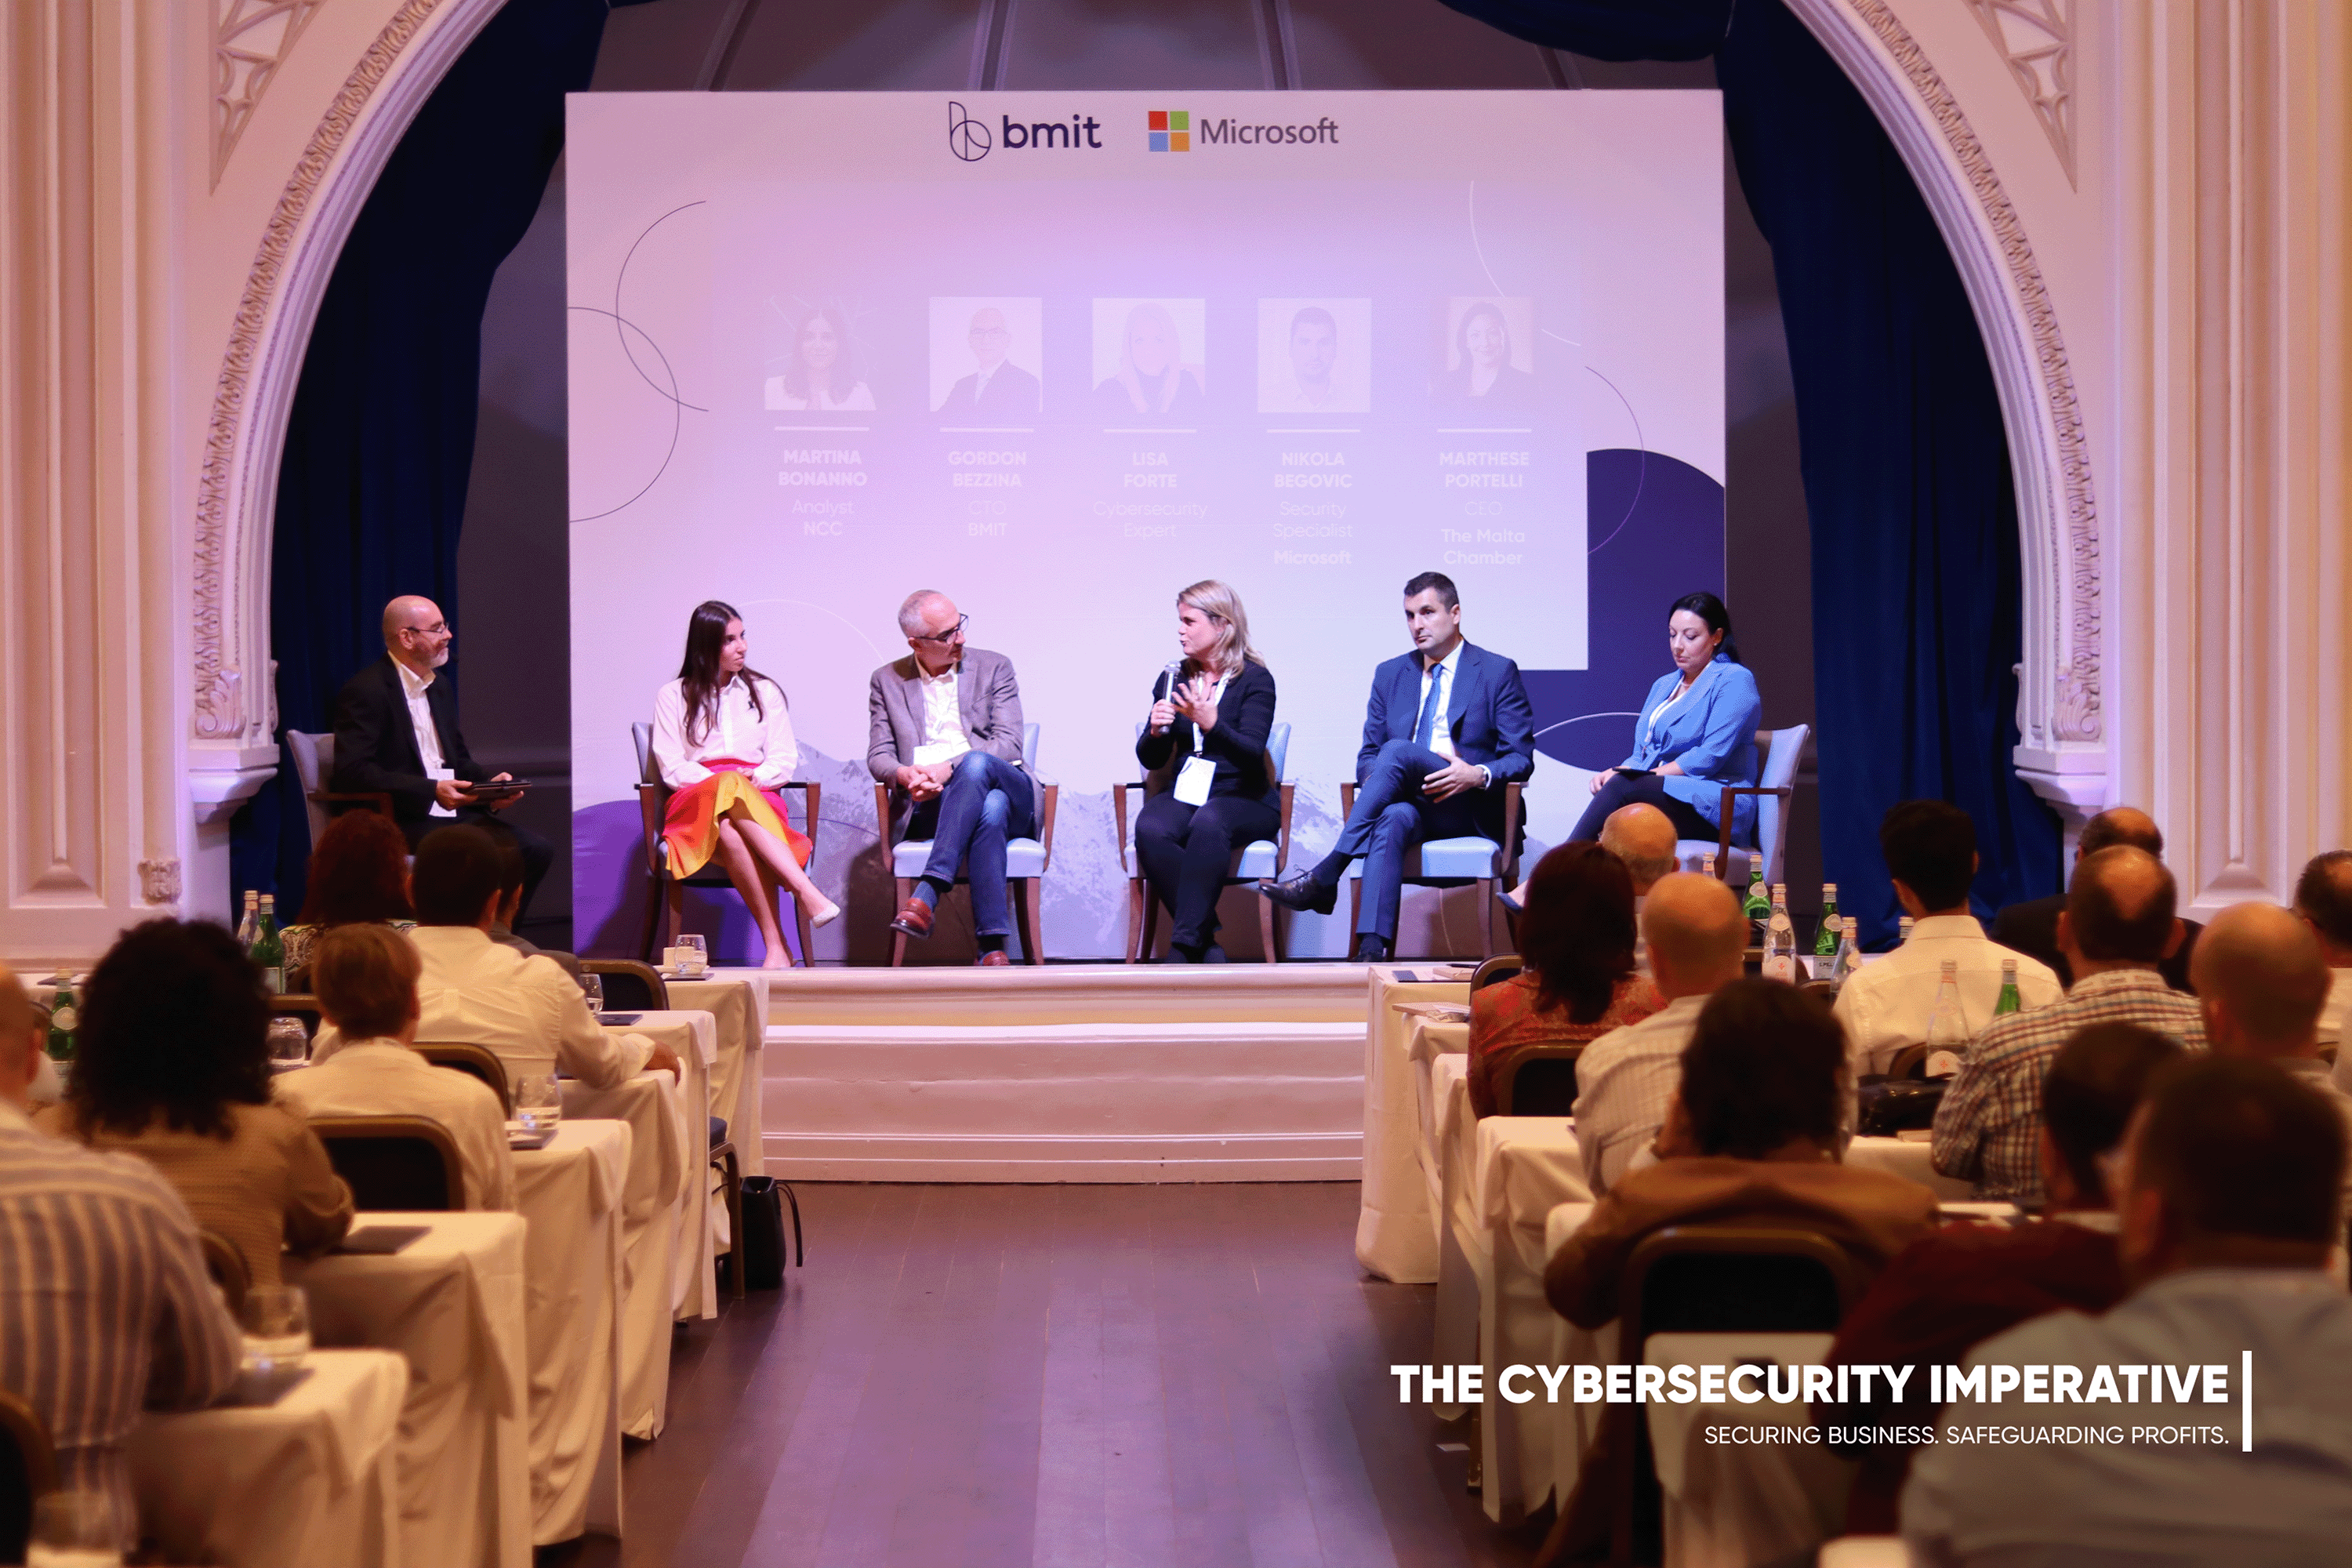 The Cybersecurity Imperative conference highlights